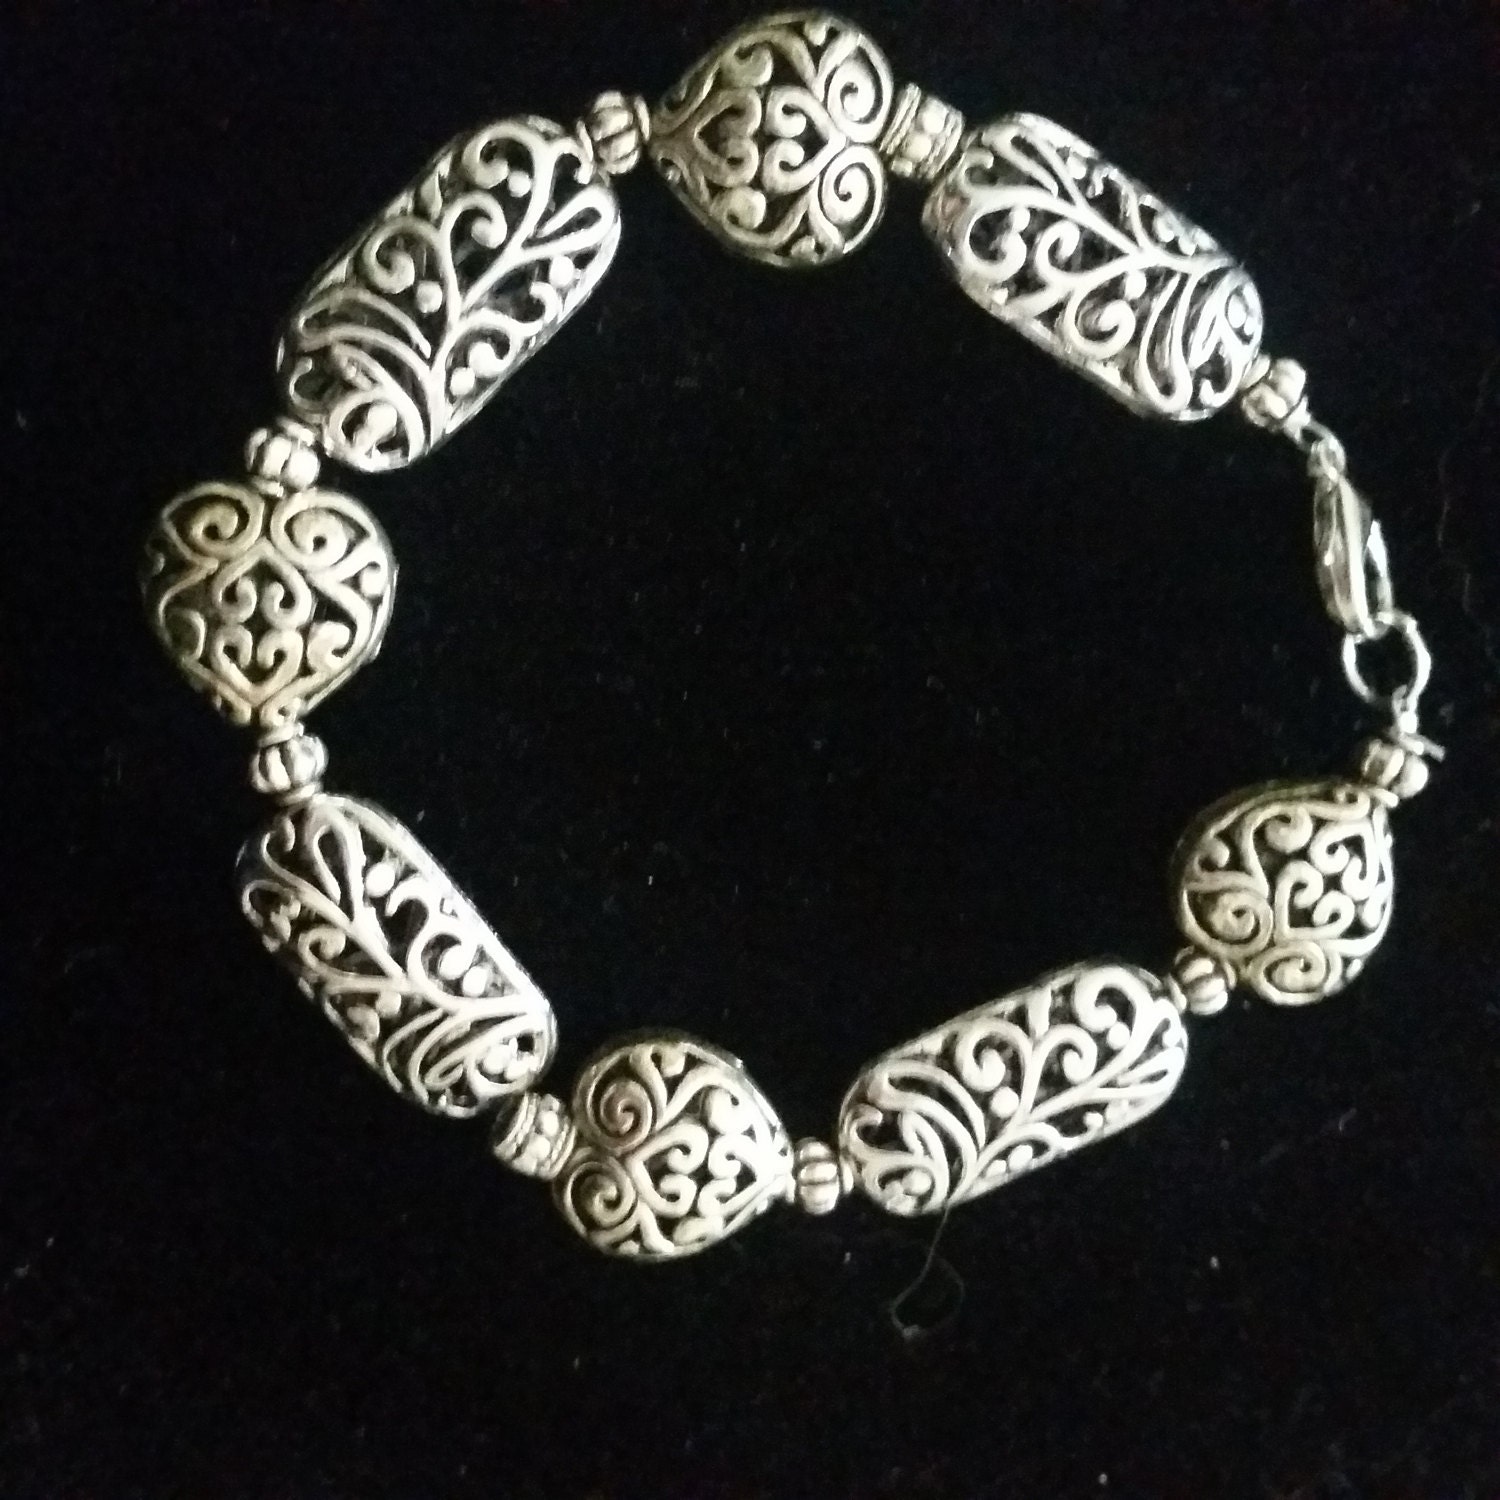 Silver filigree bracelet with hearts